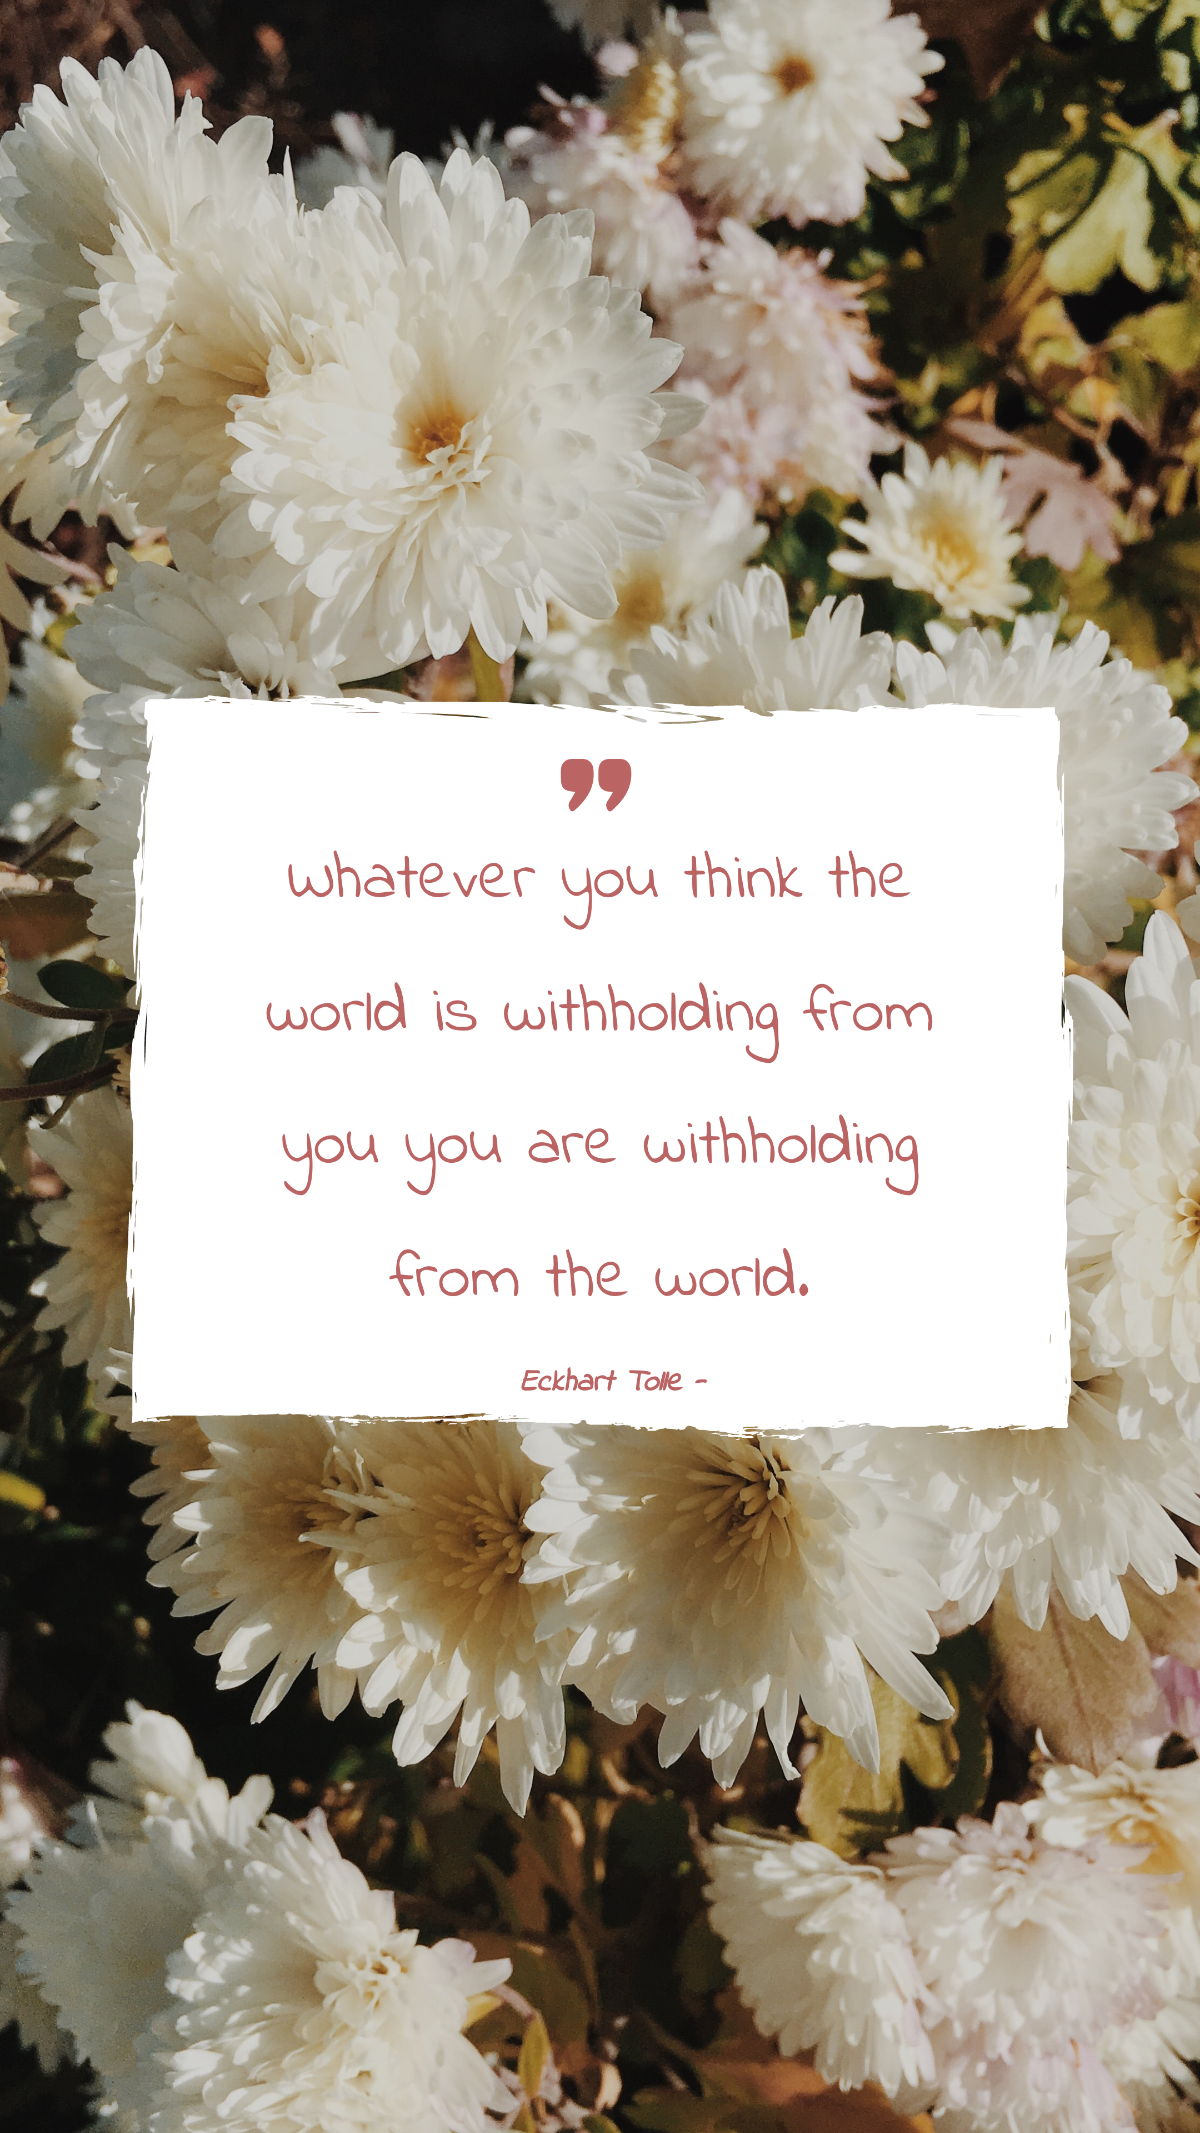 Eckhart Tolle - Whatever you think the world is withholding from you you are withholding from the world.